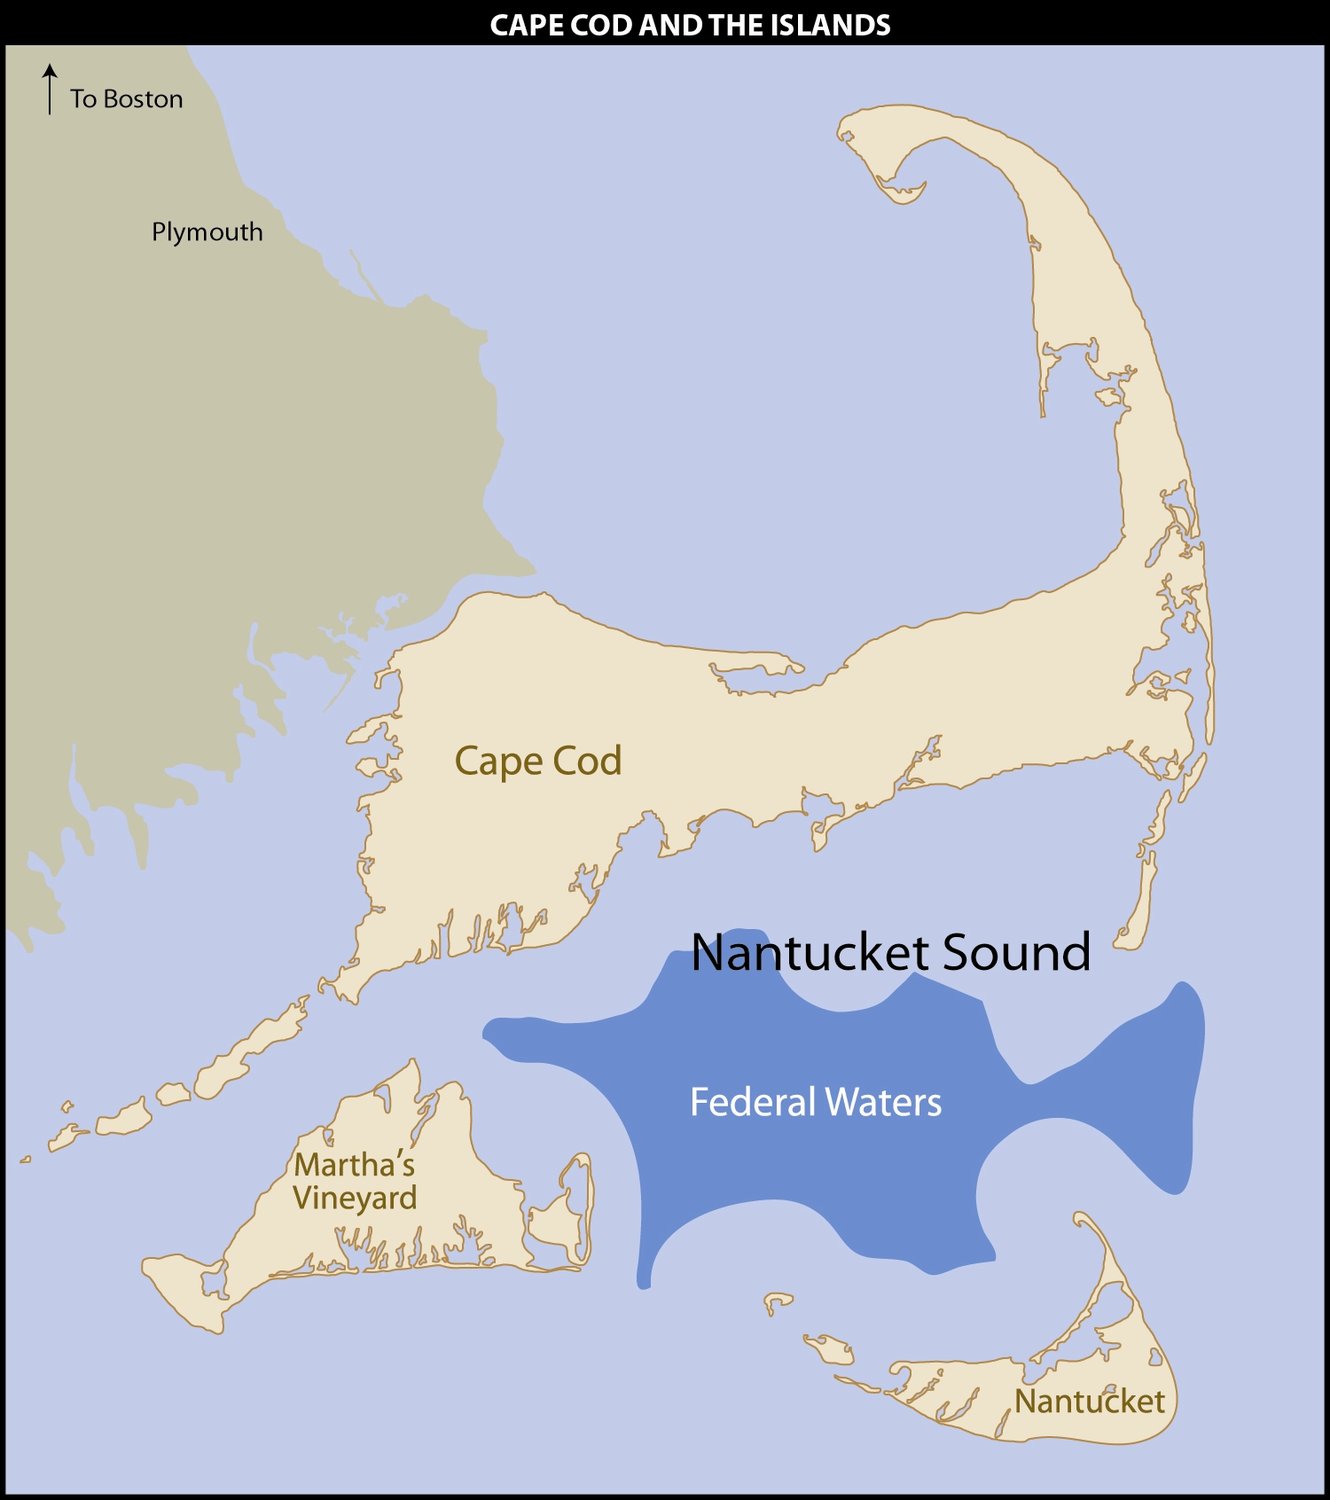 The Alliance to Protect Nantucket Sound has been working to shape legislation it hopes will bring consistency to federal and state control of the sound.